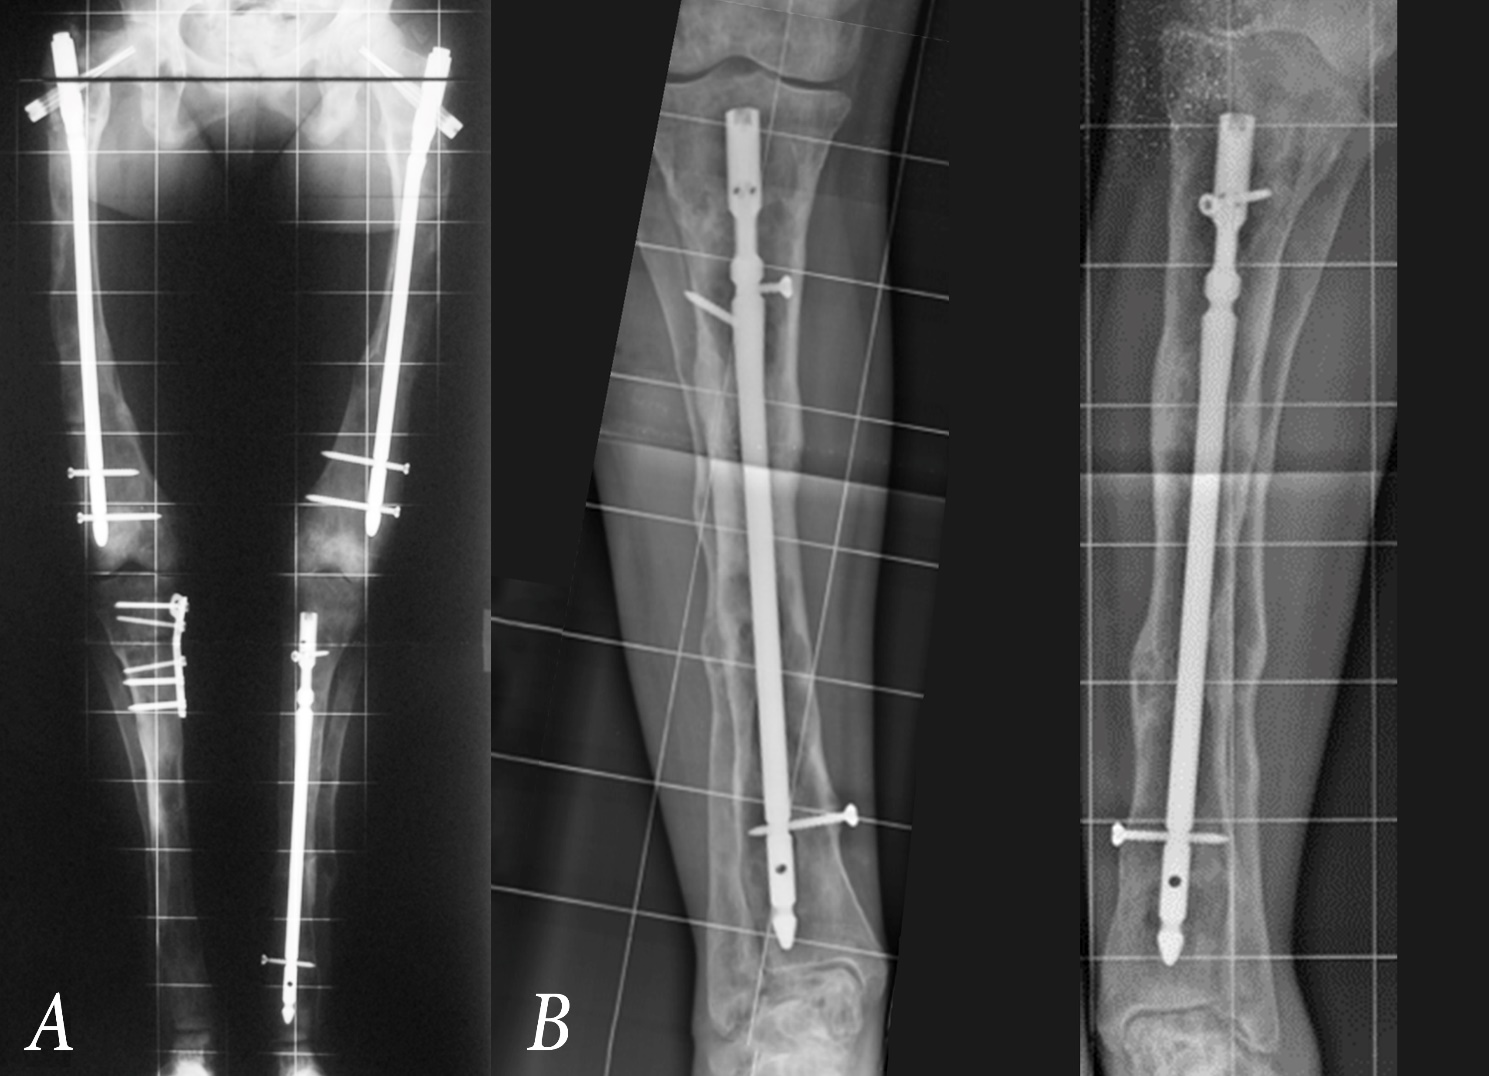 Post-Traumatic Knee Replacement Without Removing Hardware